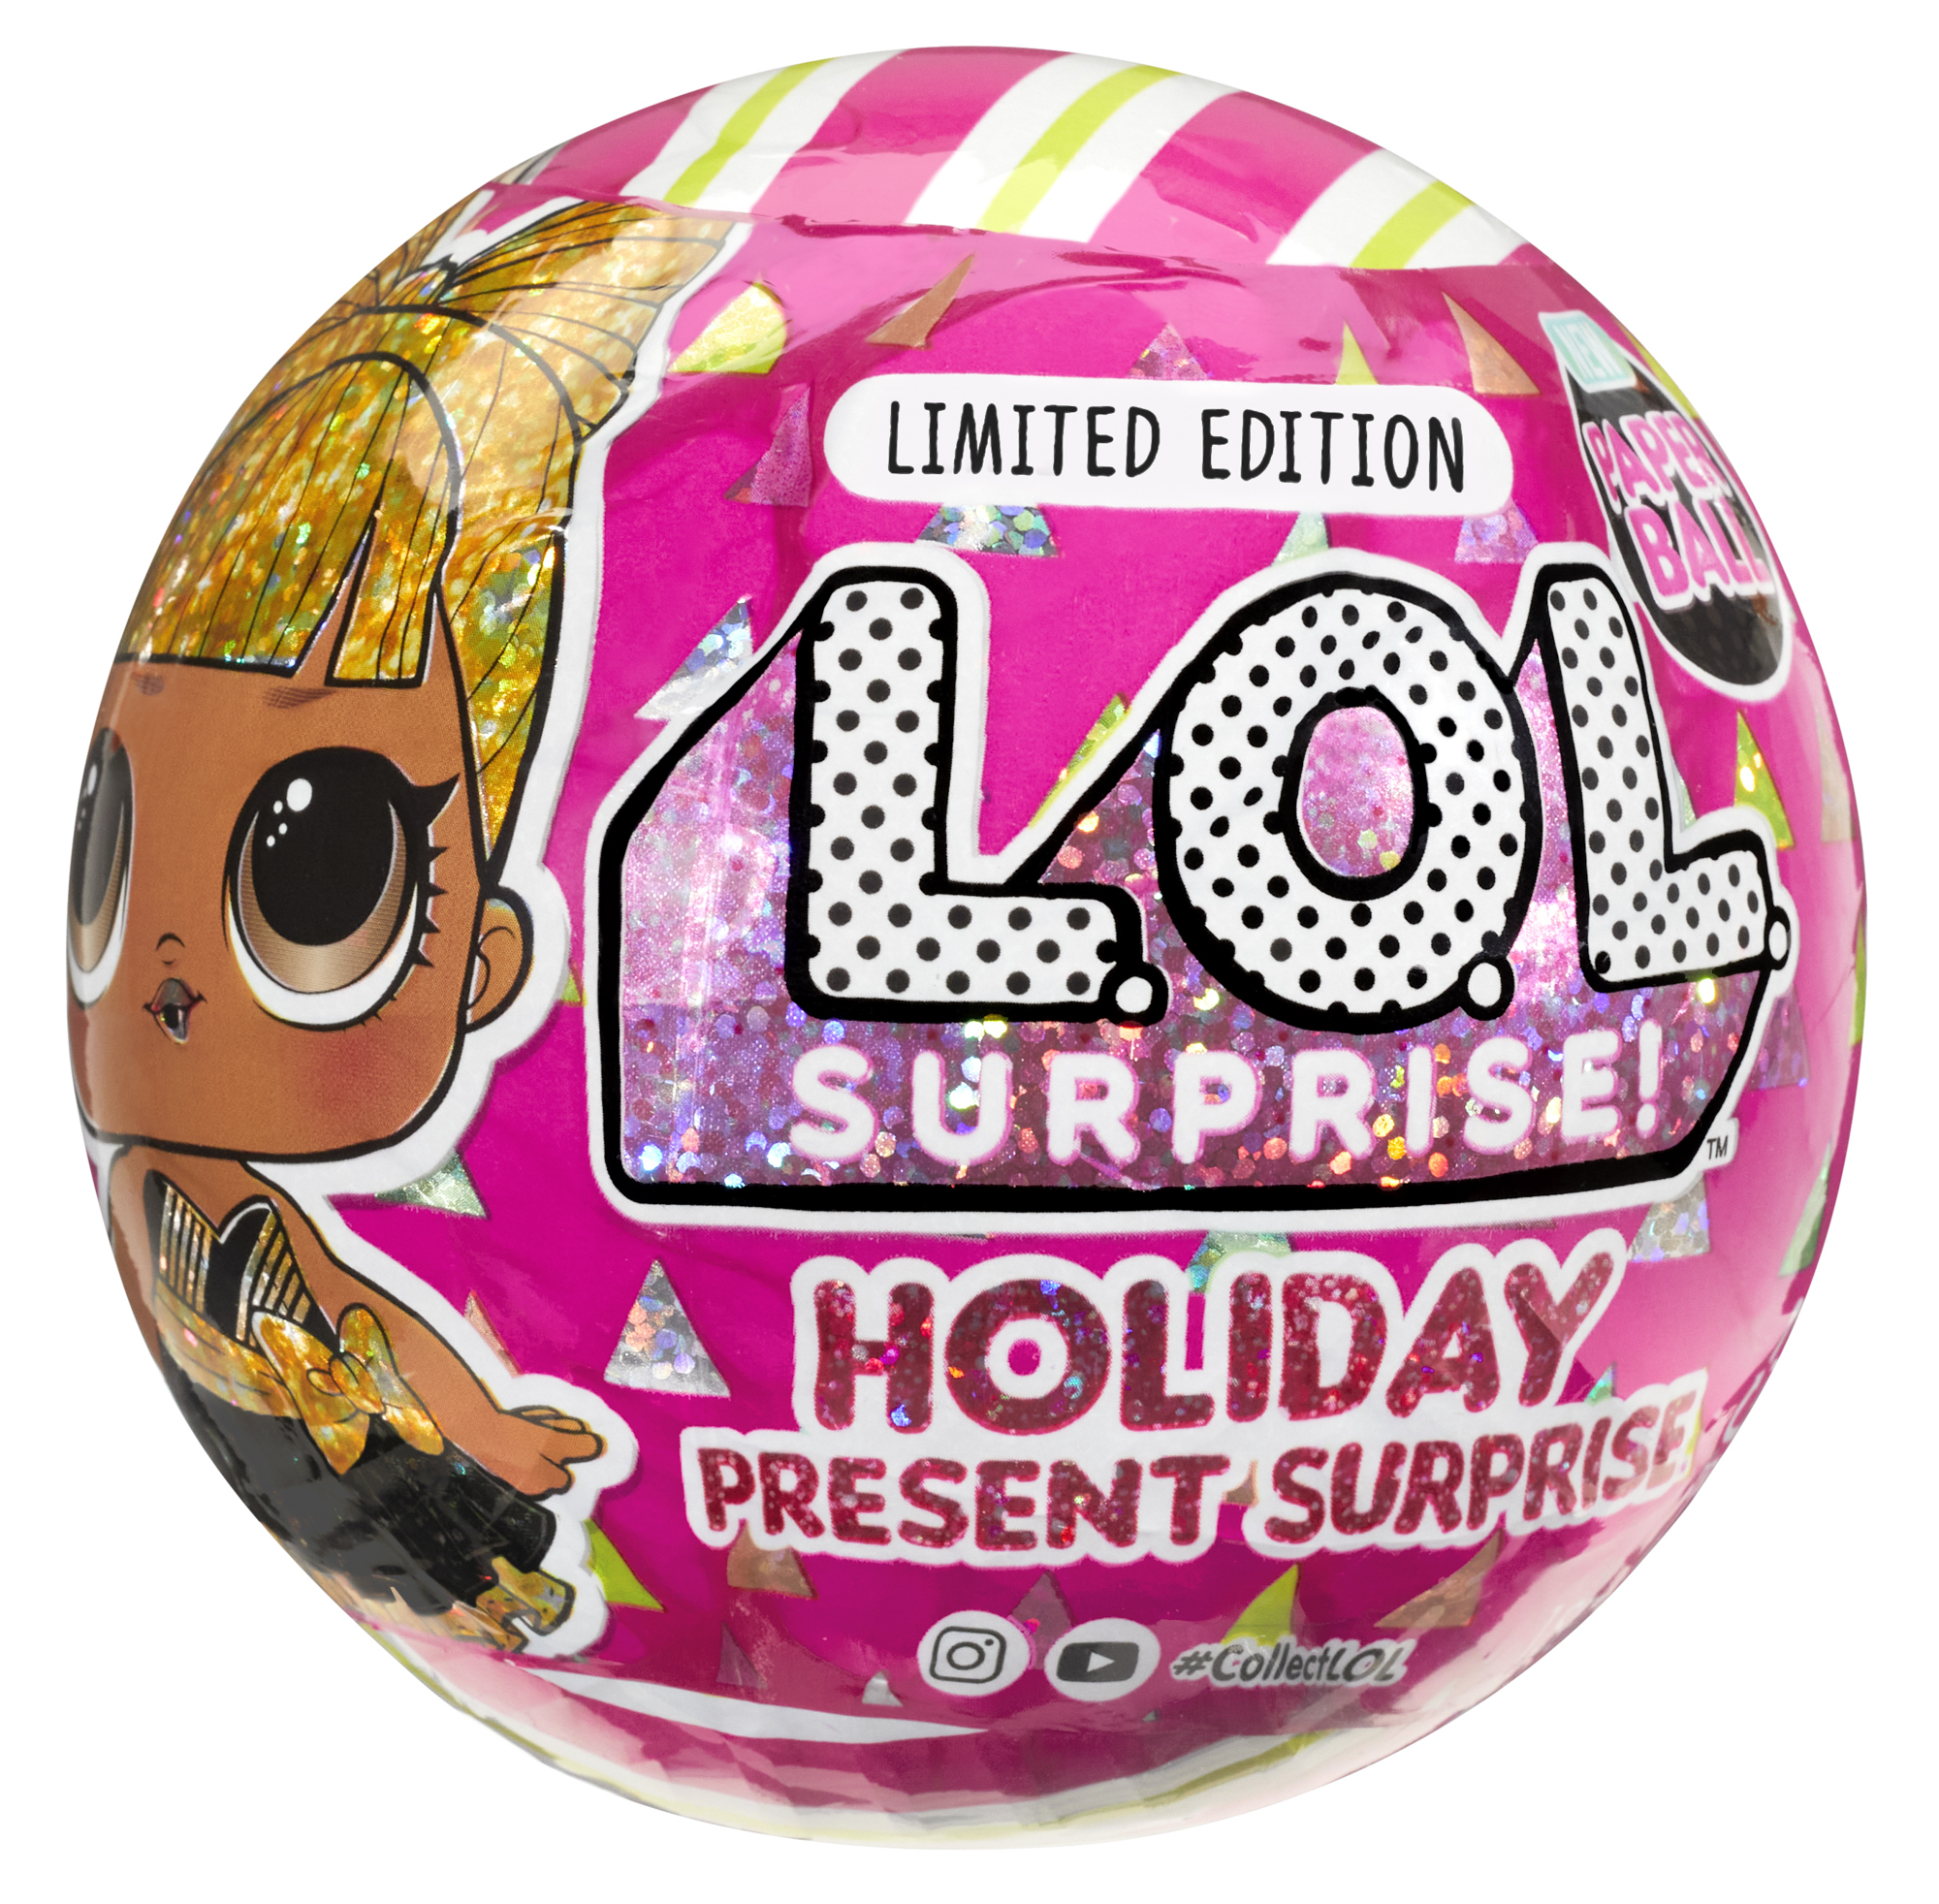 https://www.youloveit.com/uploads/posts/2022-09/1664378639_youloveit_com_lol_surprise_holiday_present_surprise_limited-edition_dolls48.jpg